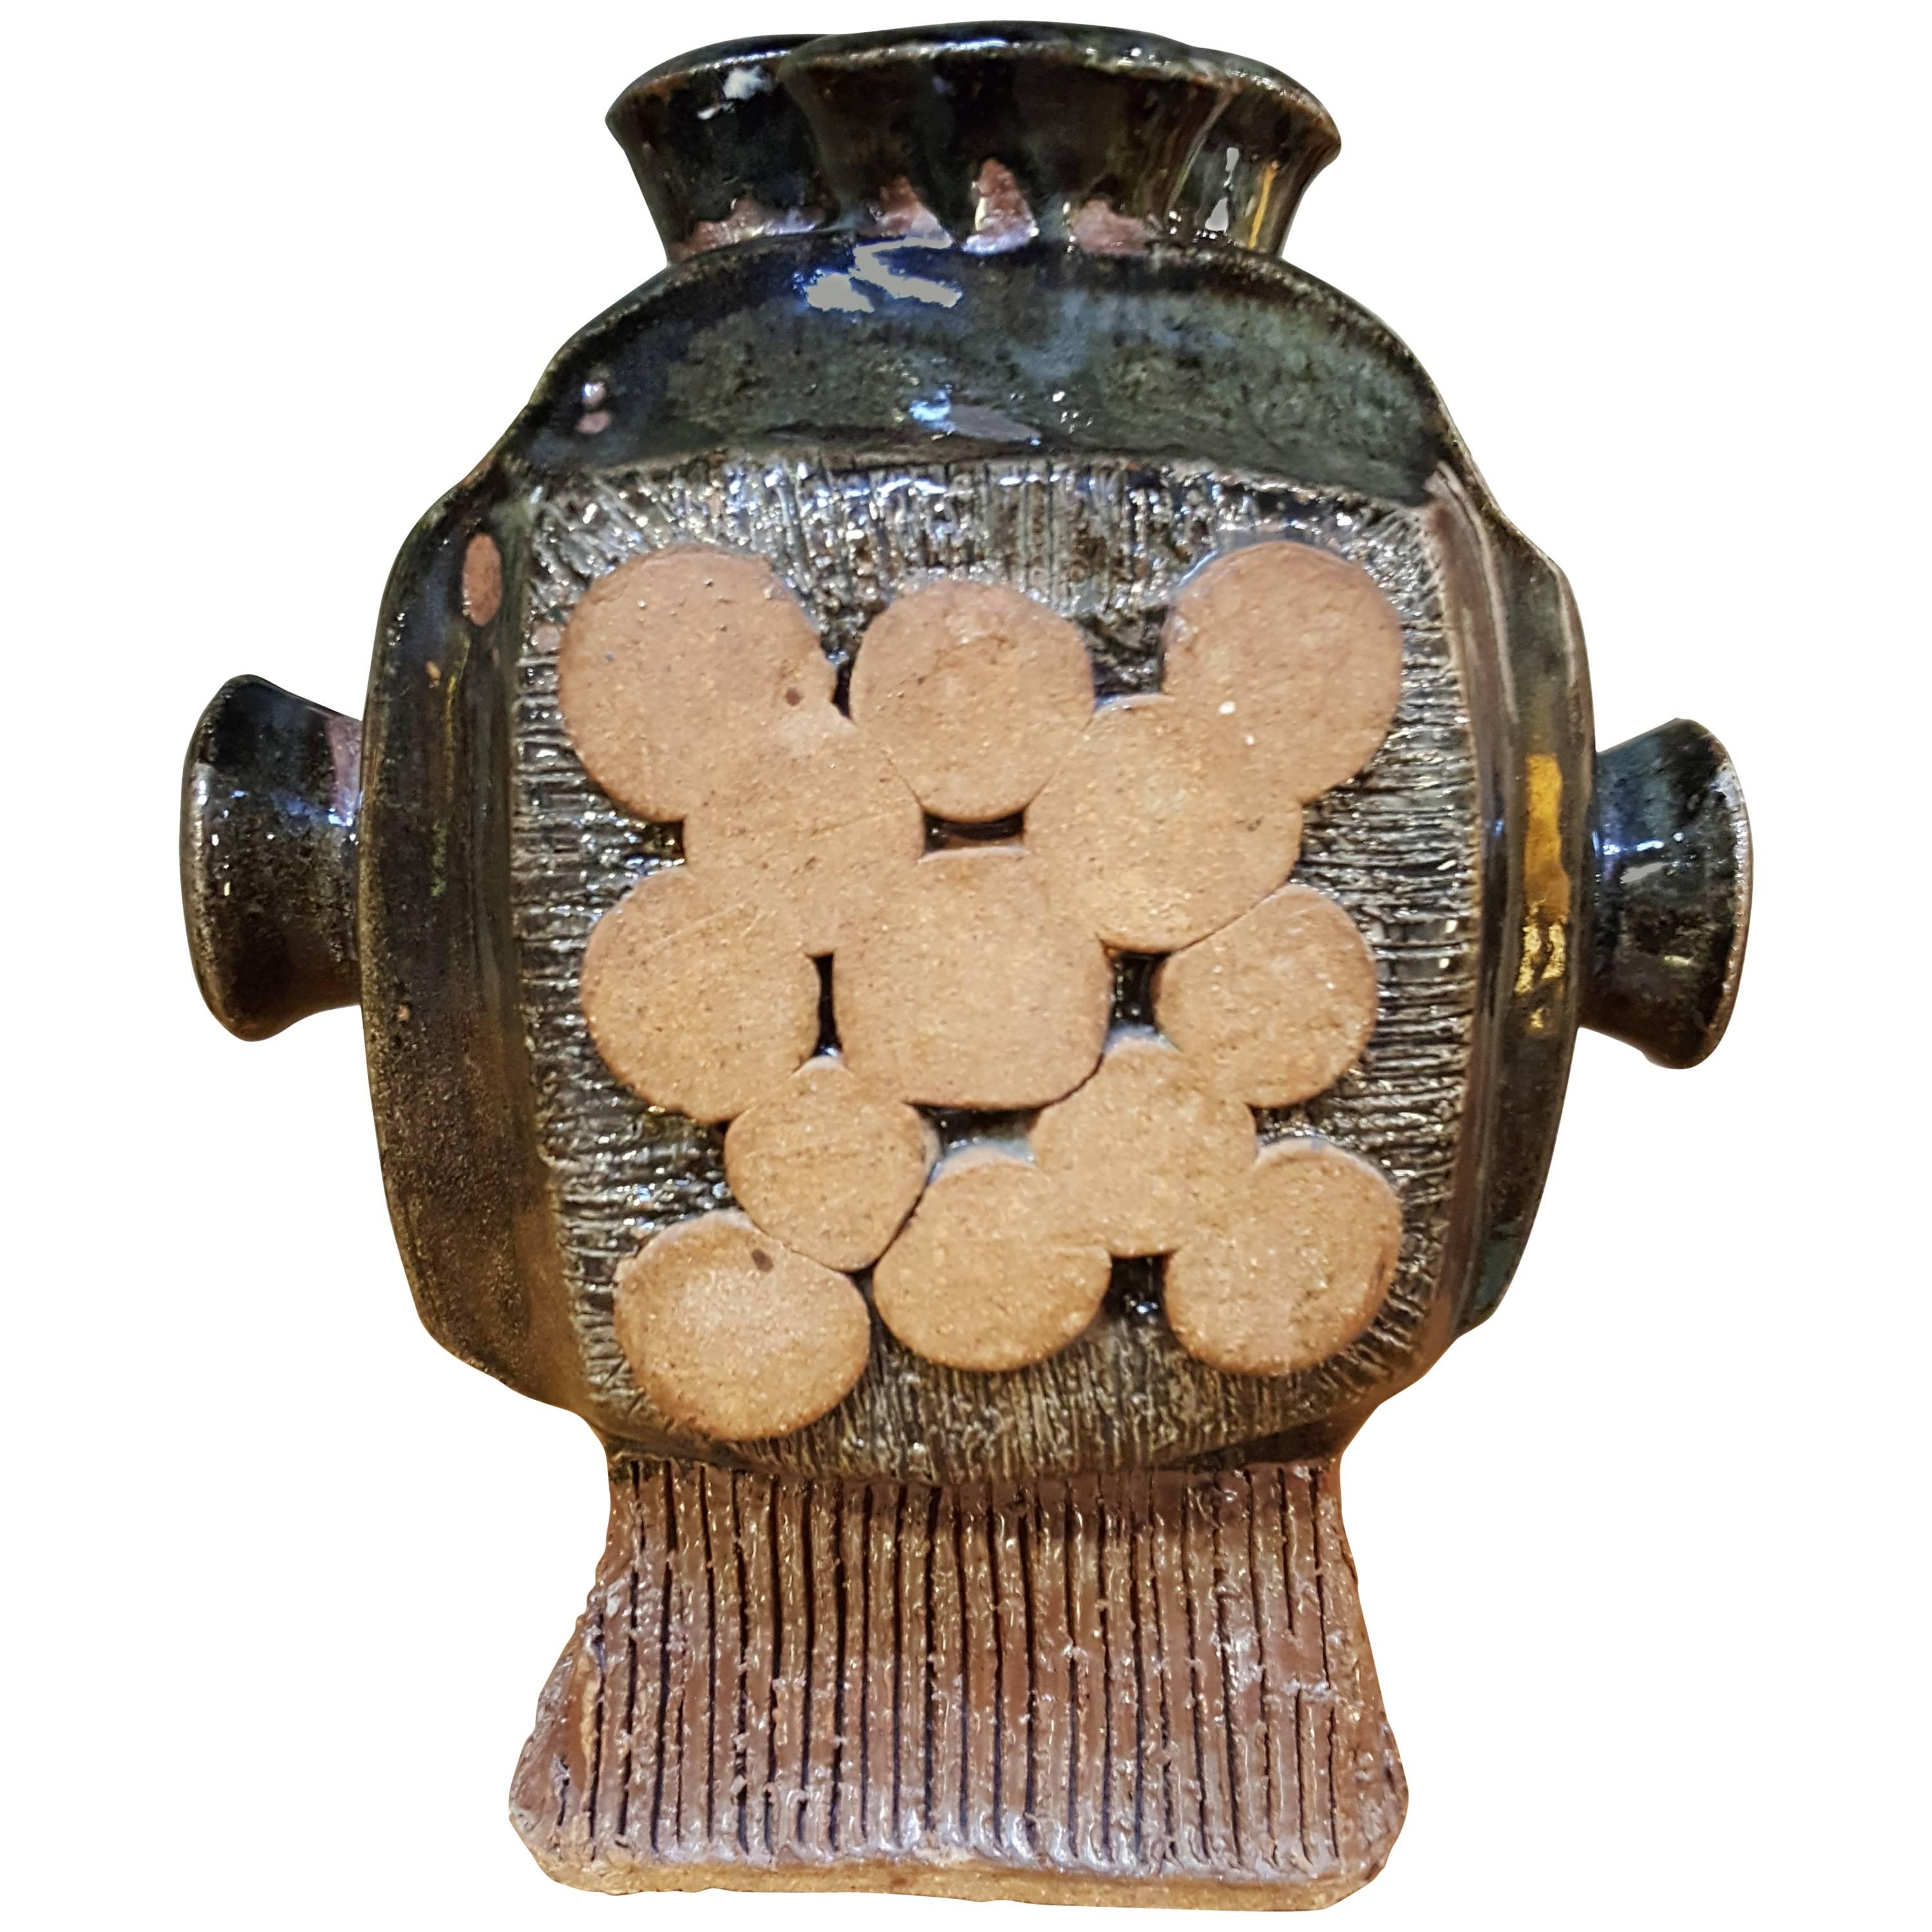 Assemblage Studio Pottery by Herman Roderick Volz For Sale